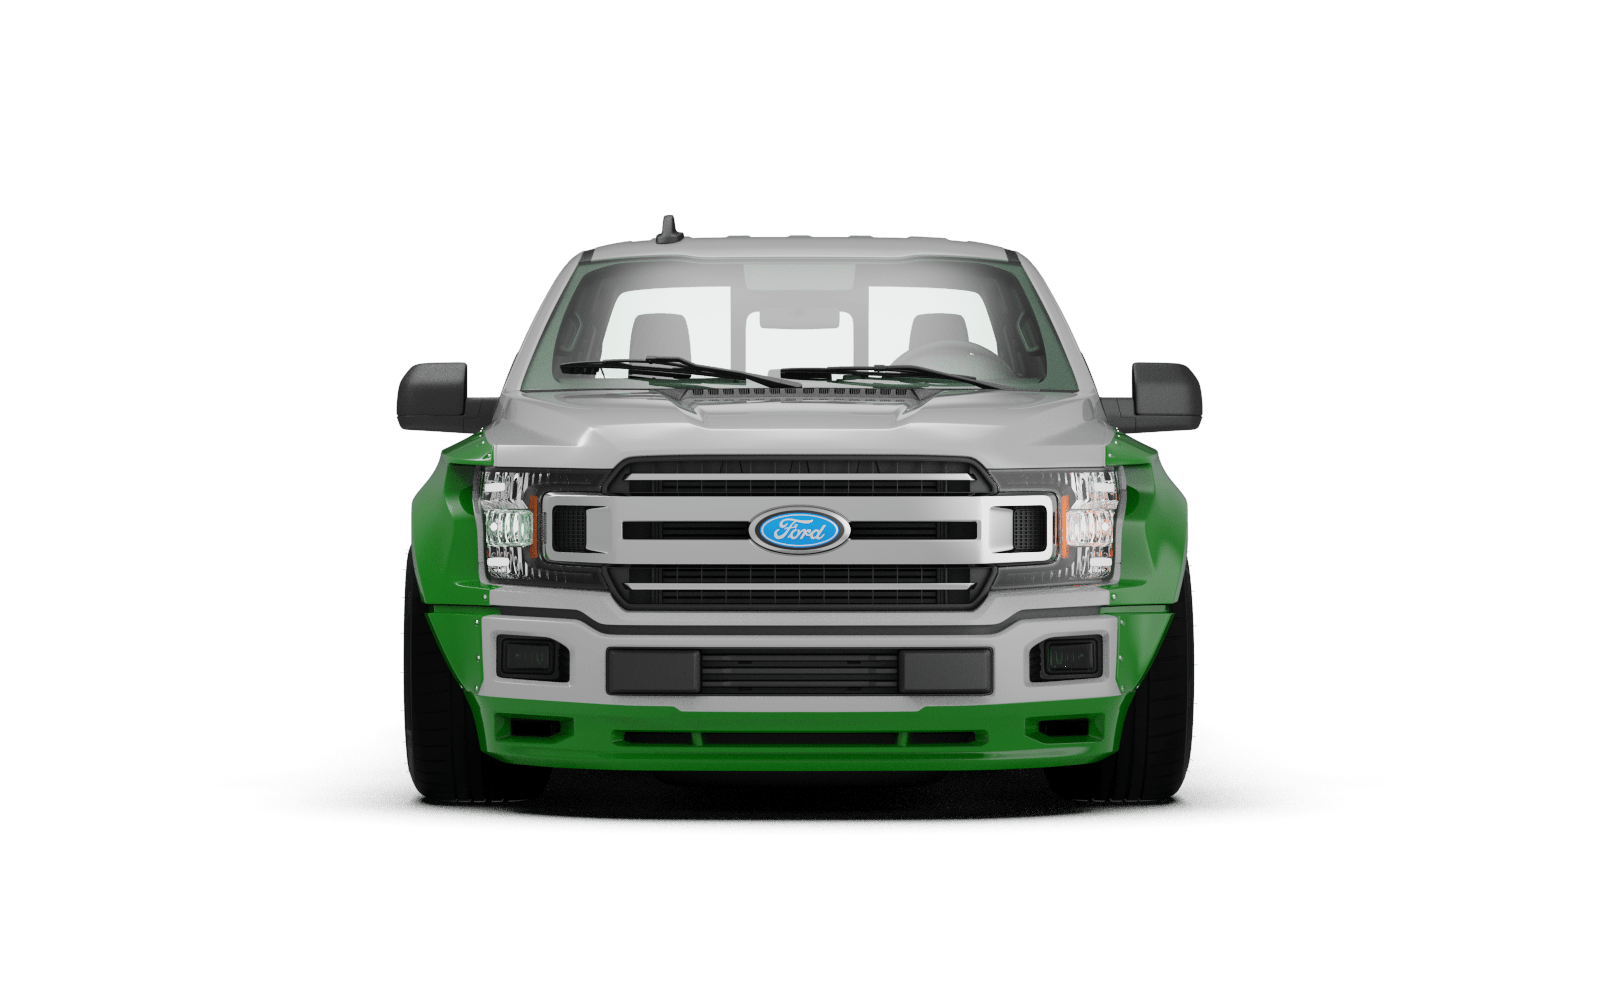 Clinched Ford F-150 (5.5 bed) Widebody Kit